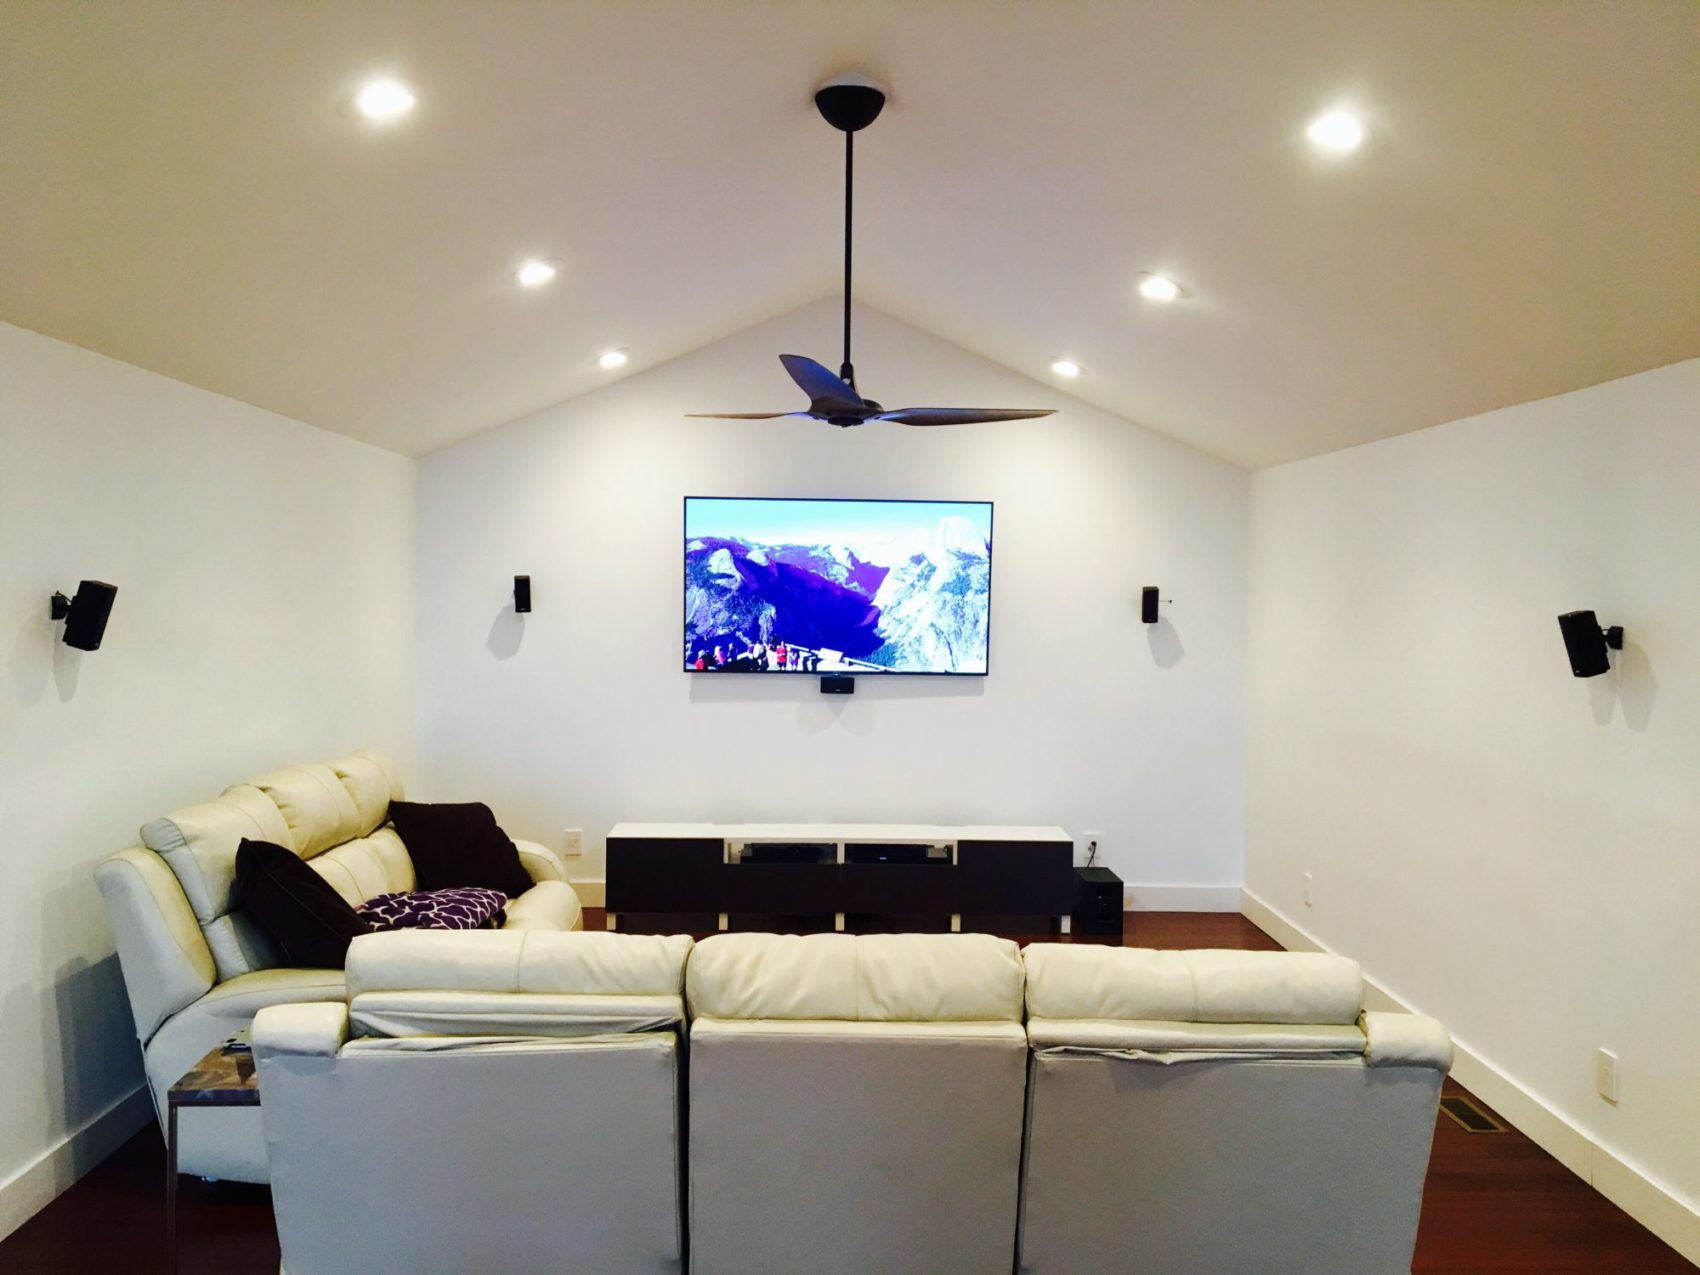 Bose Lifestyle 600 series Home Theater Installation